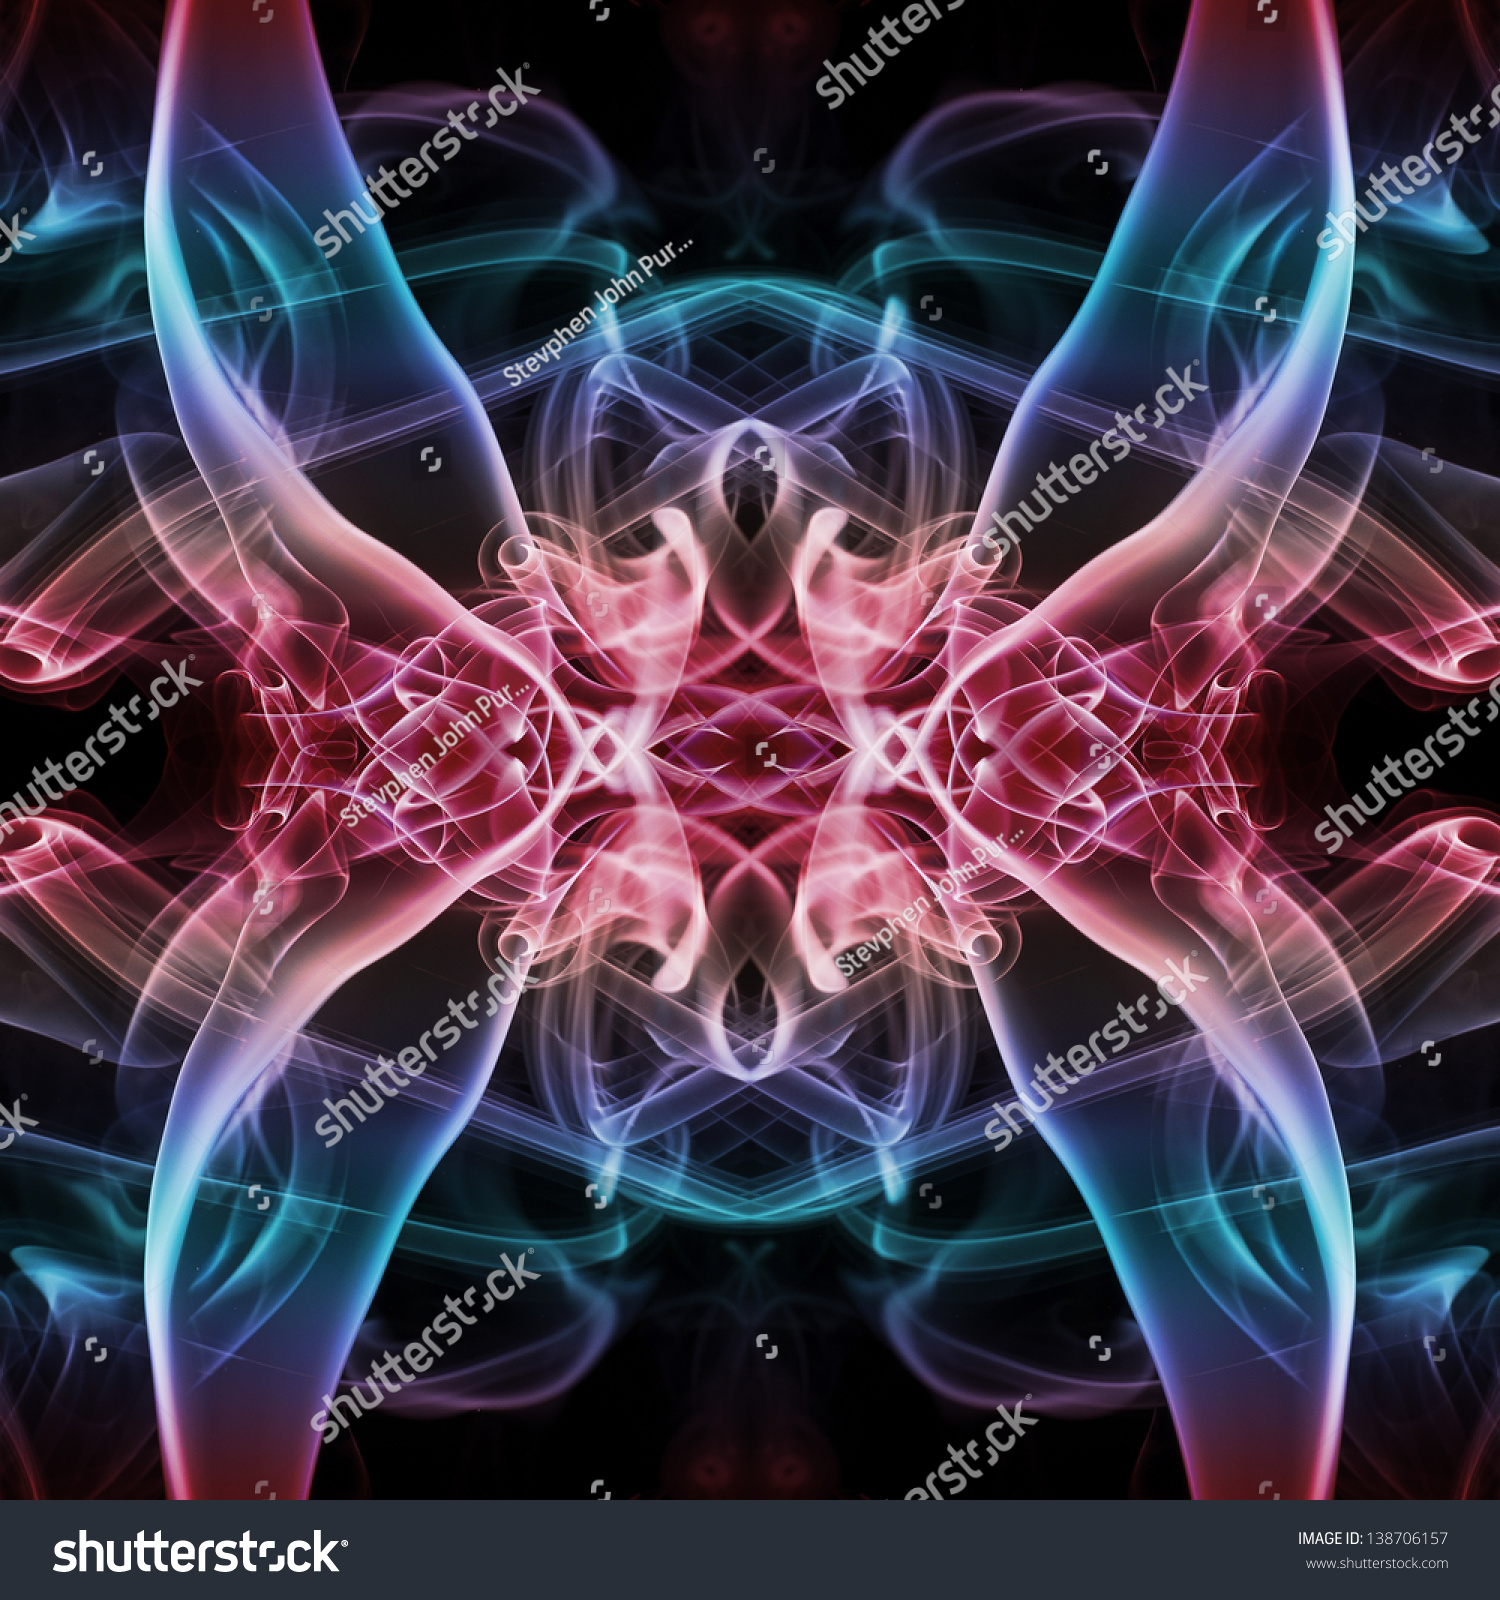 Abstract Smoke Trails Stock Photo 138706157 - Shutterstock